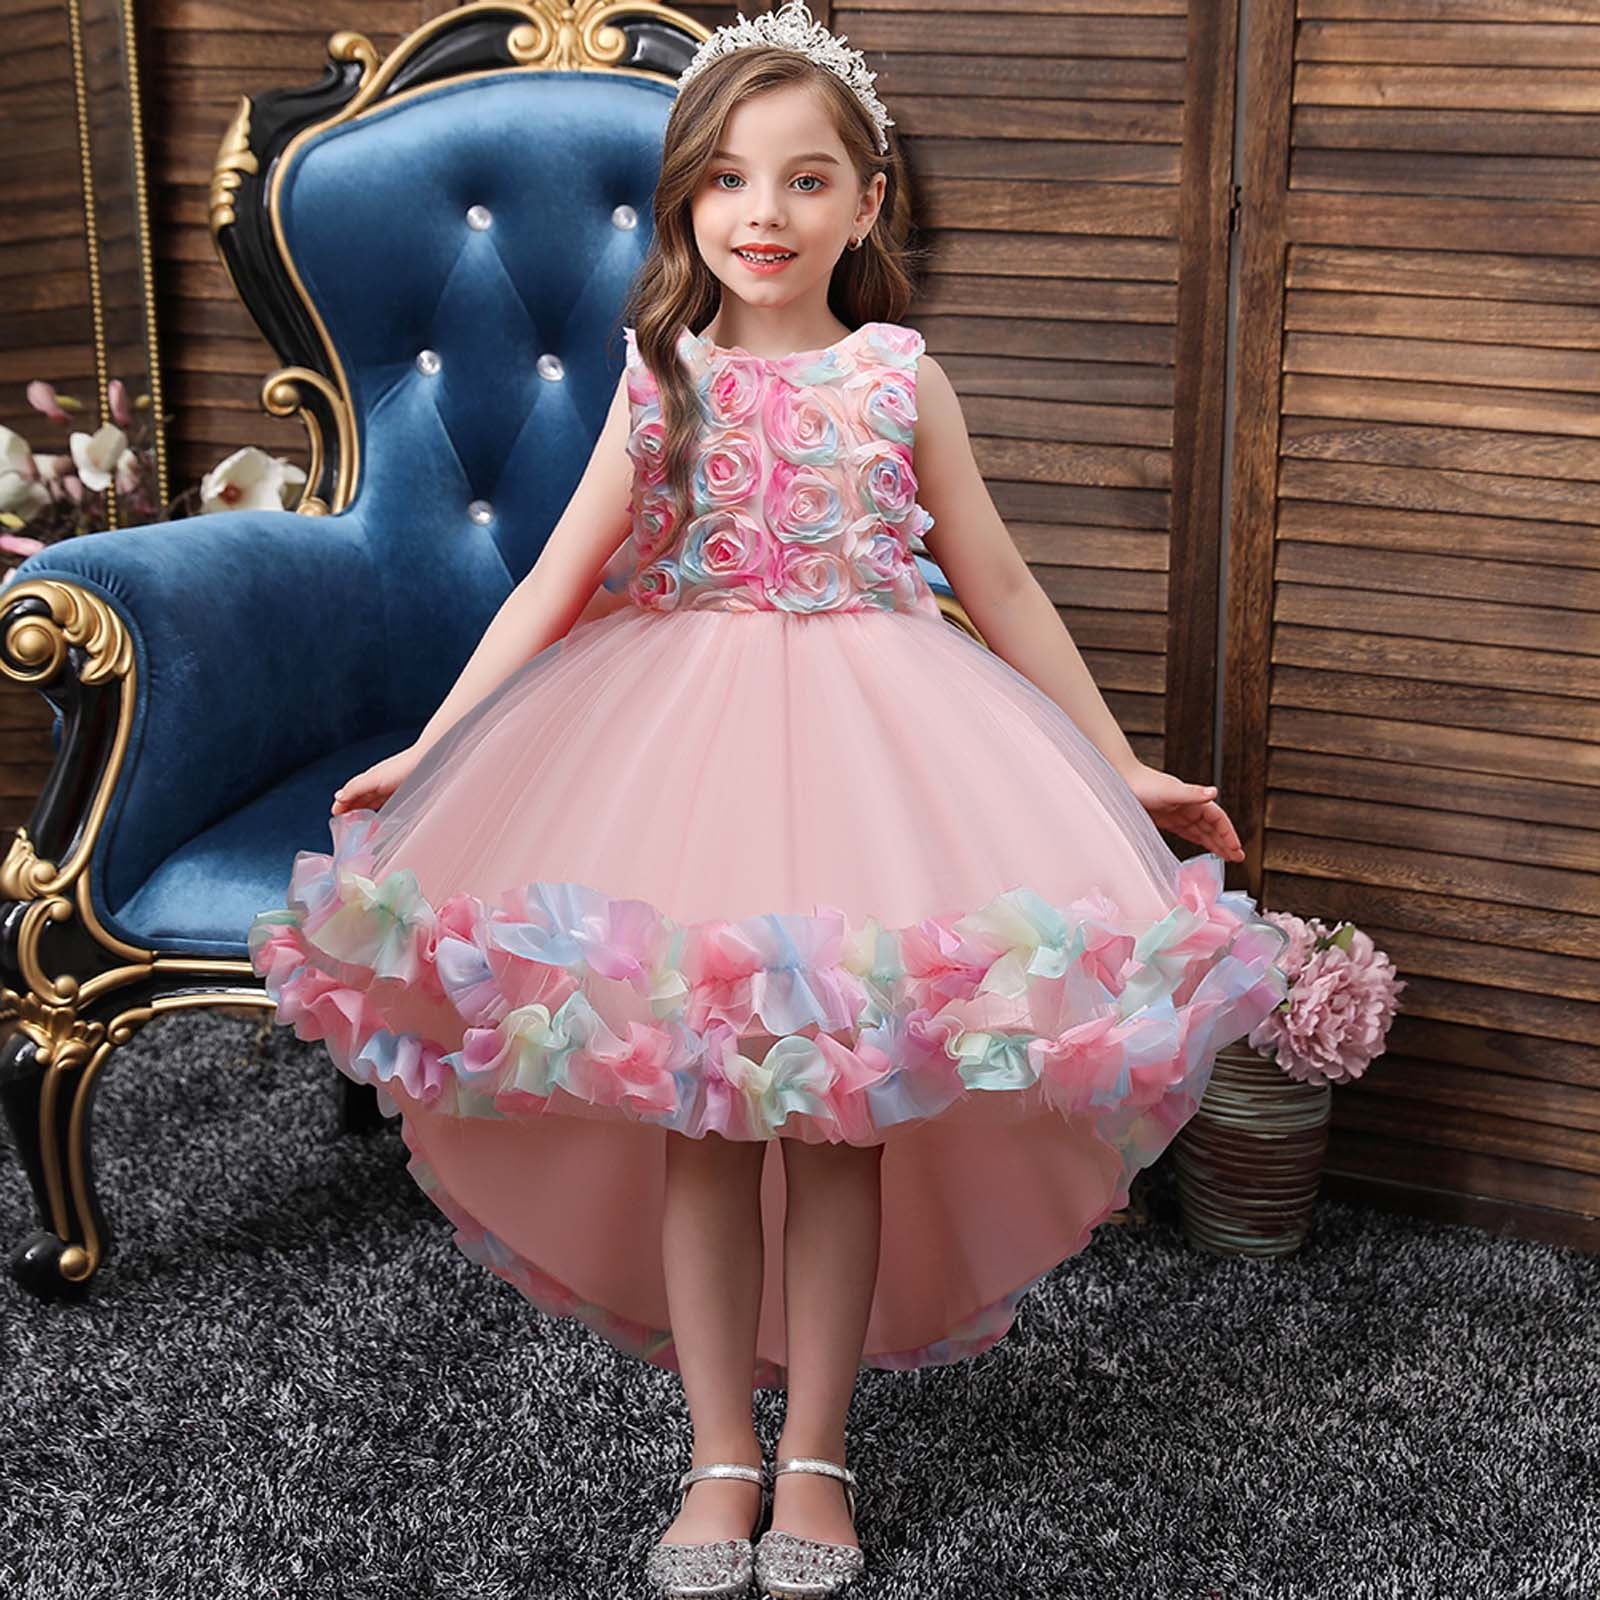 12 Flower Girl Dresses Sure to Make an Impression | PreOwned Wedding Dresses  | Girls couture dresses, Girls long dresses, Girls dresses